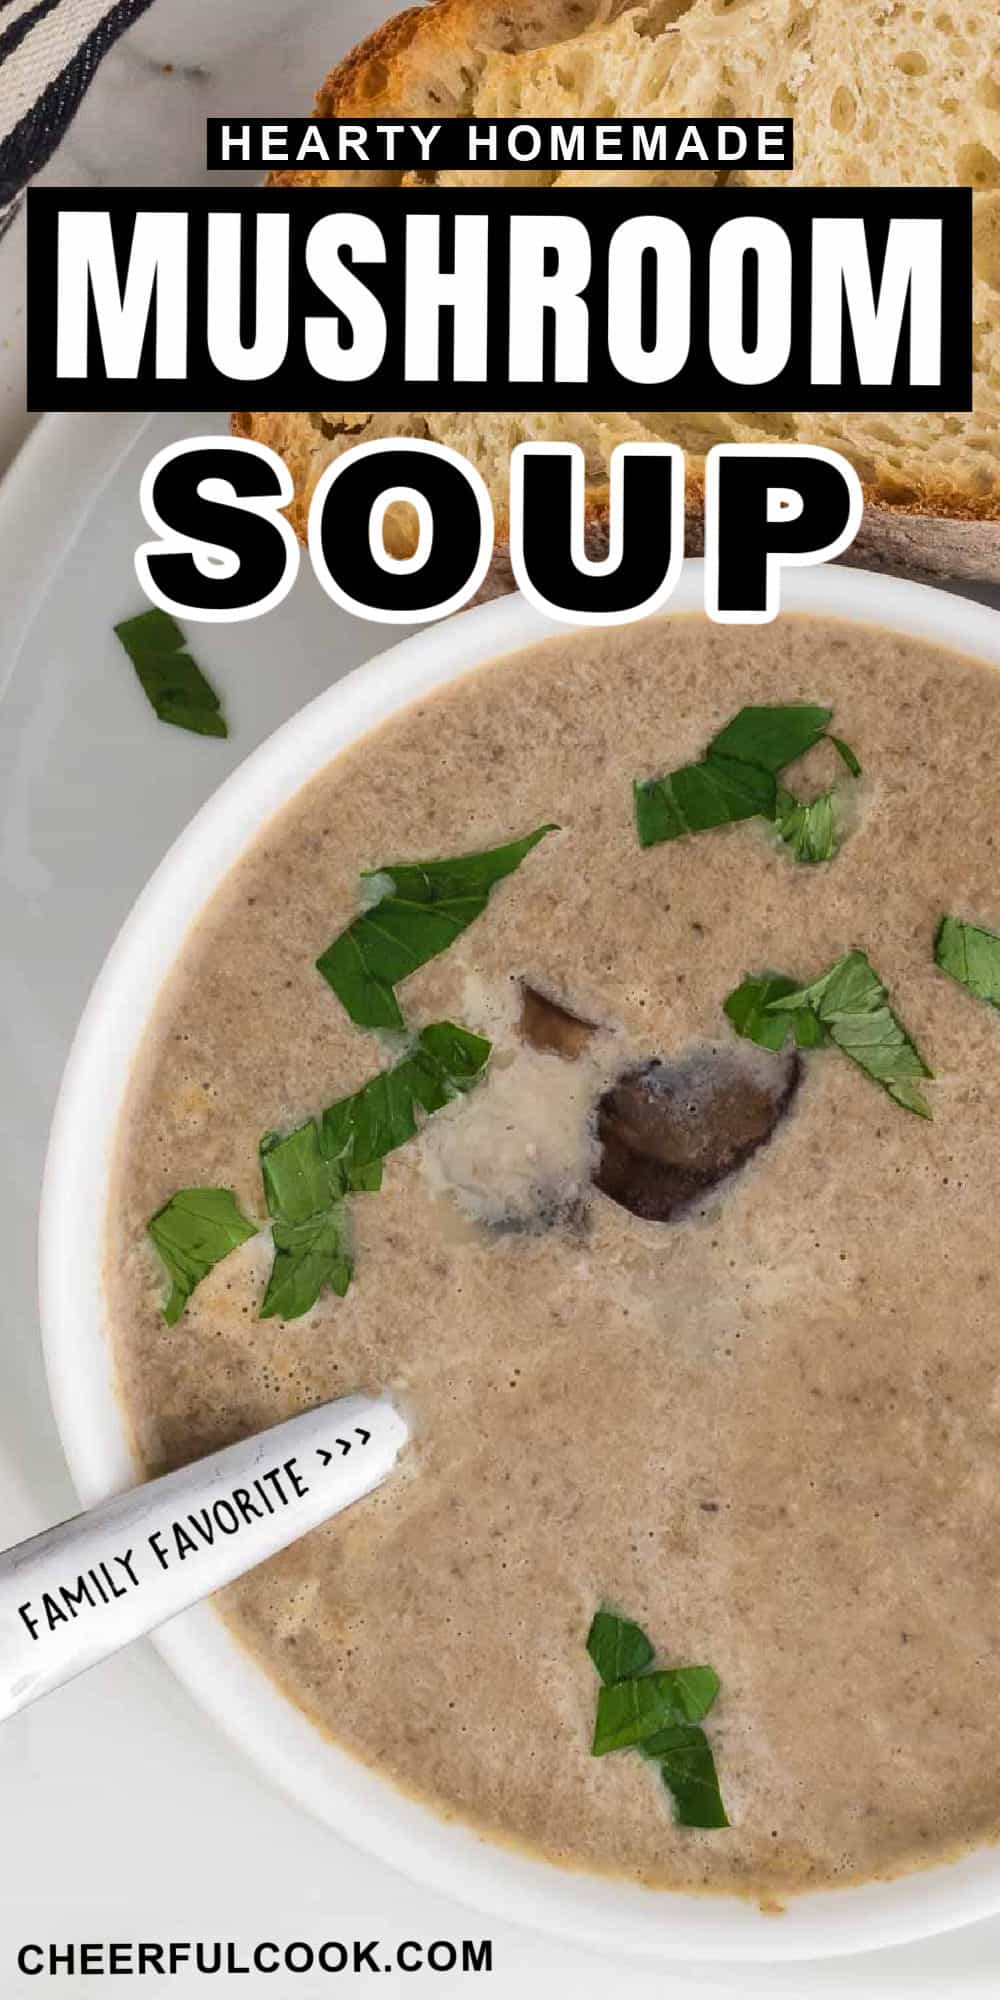 This homemade Mushroom Soup is jam packed with the hearty flavors of fresh and dried mushrooms. And it's perfect for cold days. Add a slice or two of toasted baguette and you'll have a delicious lunch or light dinner. #cheerfulcook #mushroomsoup #entree #recipe #mushroom #hearty #easy #best via @cheerfulcook